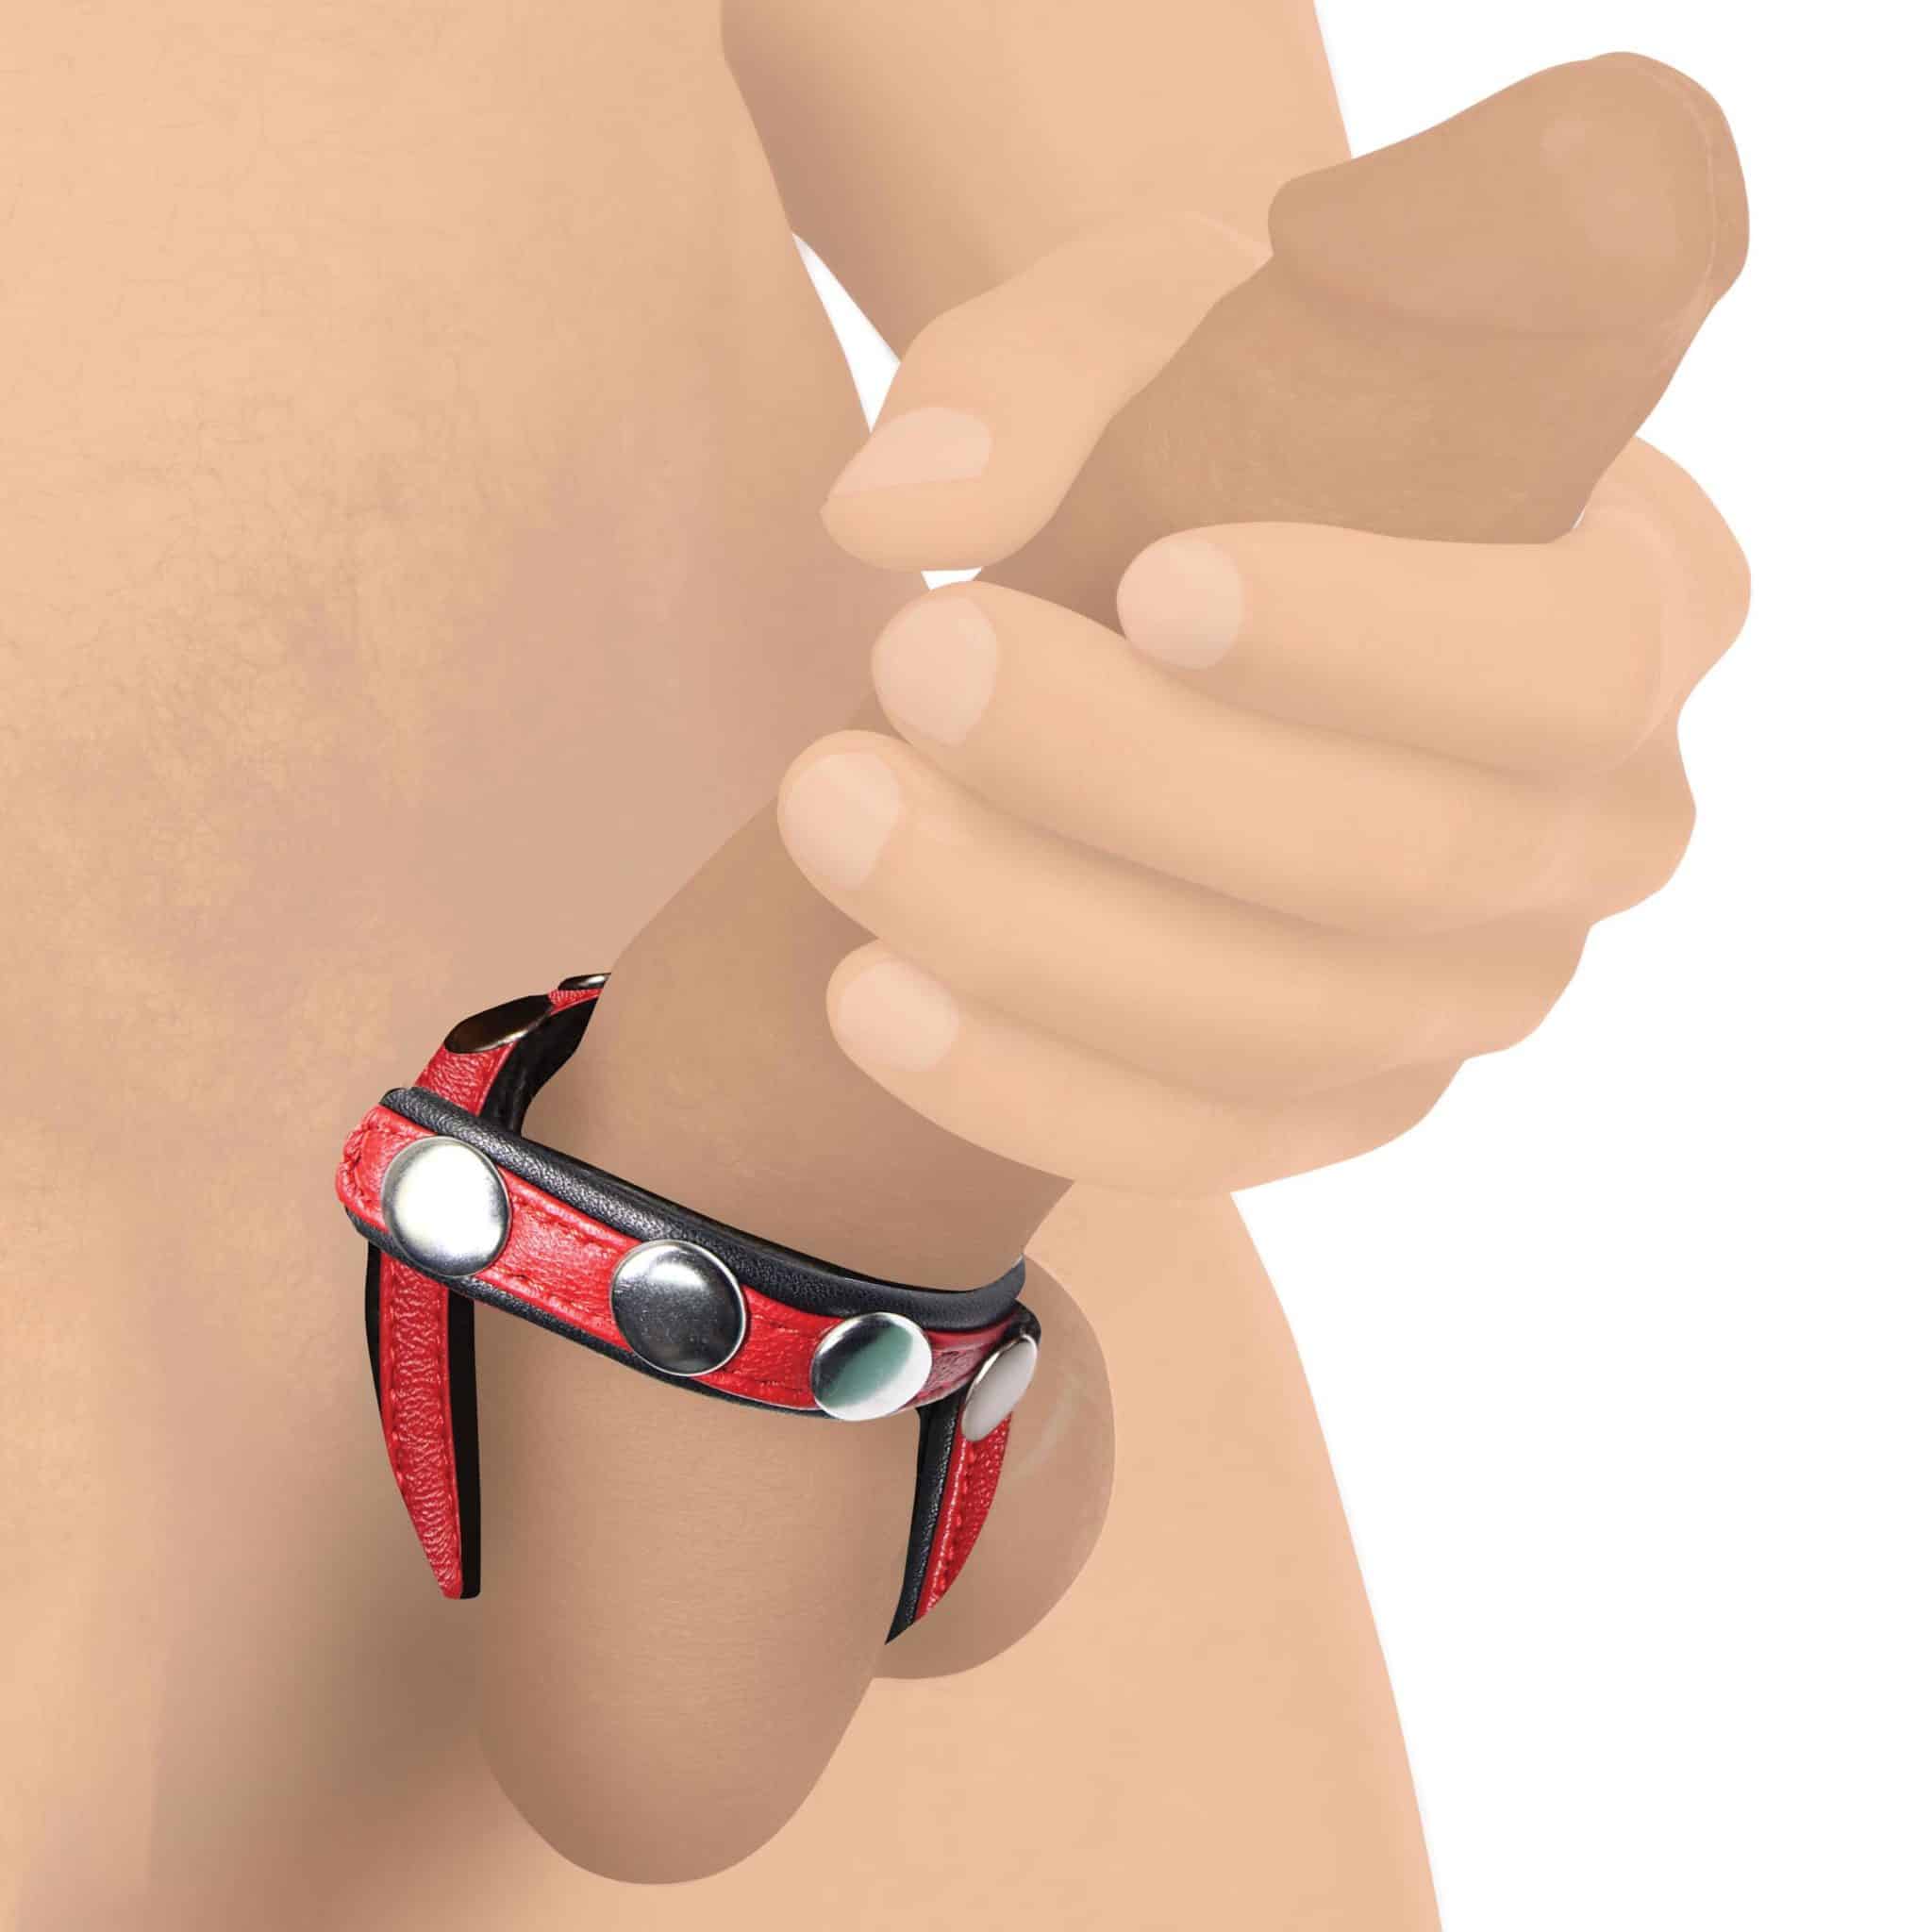 Leather Snap-On Cock Harness - Red-8